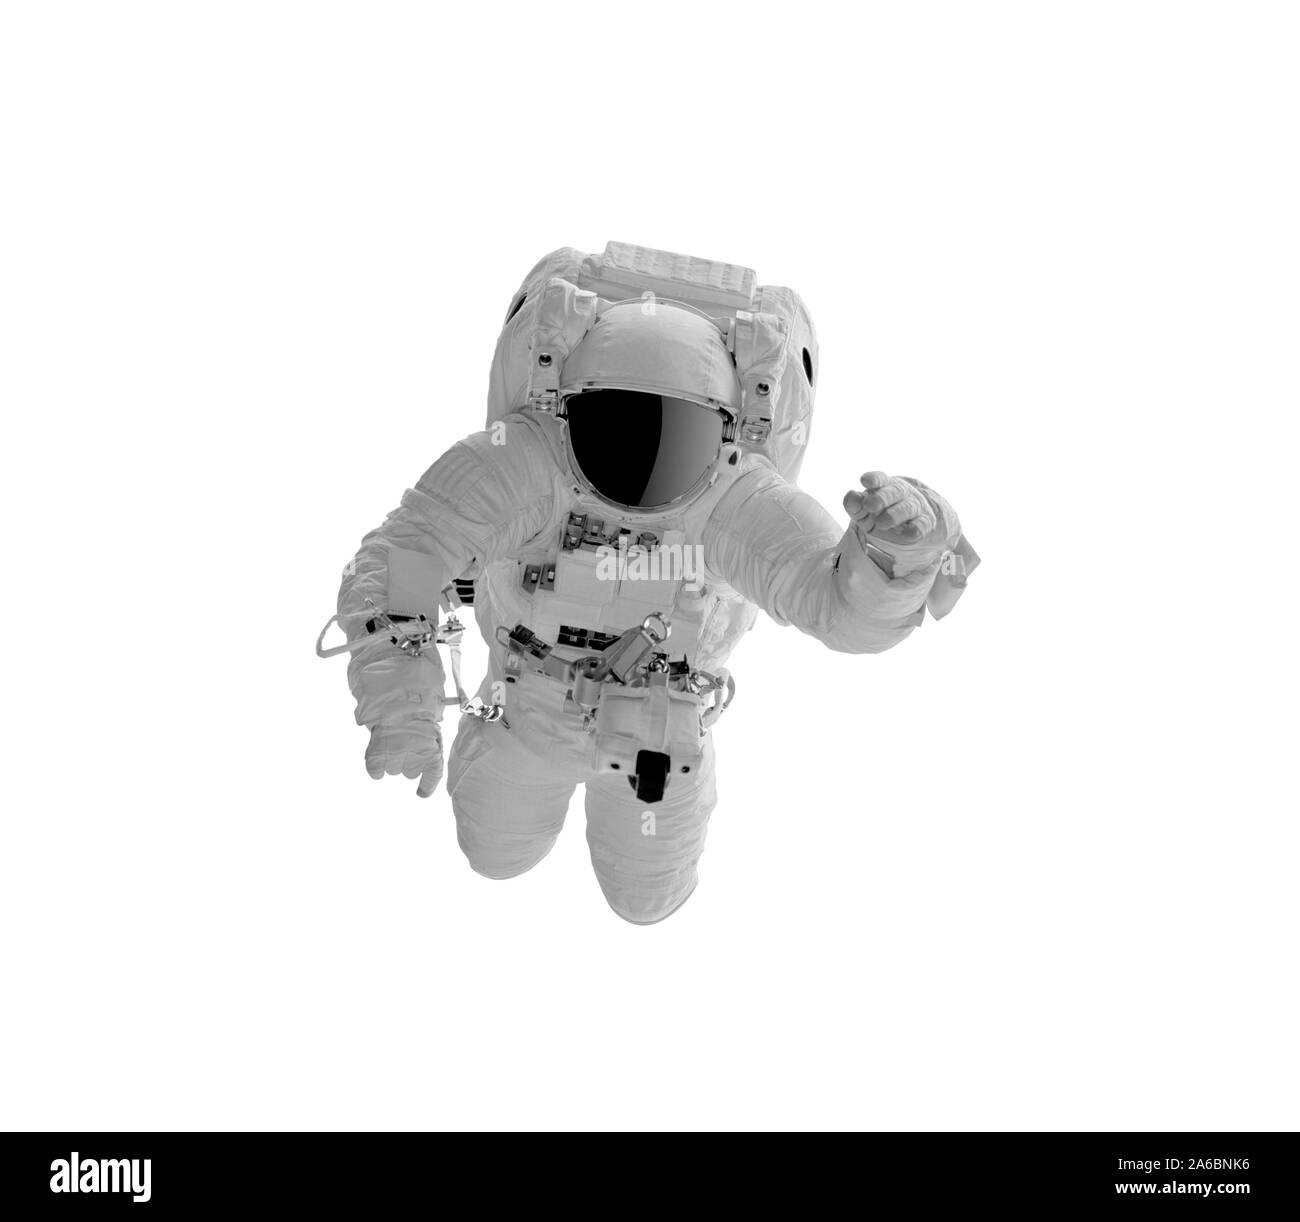 Astronaft in a spacesuit isolated on white. Stock Photo